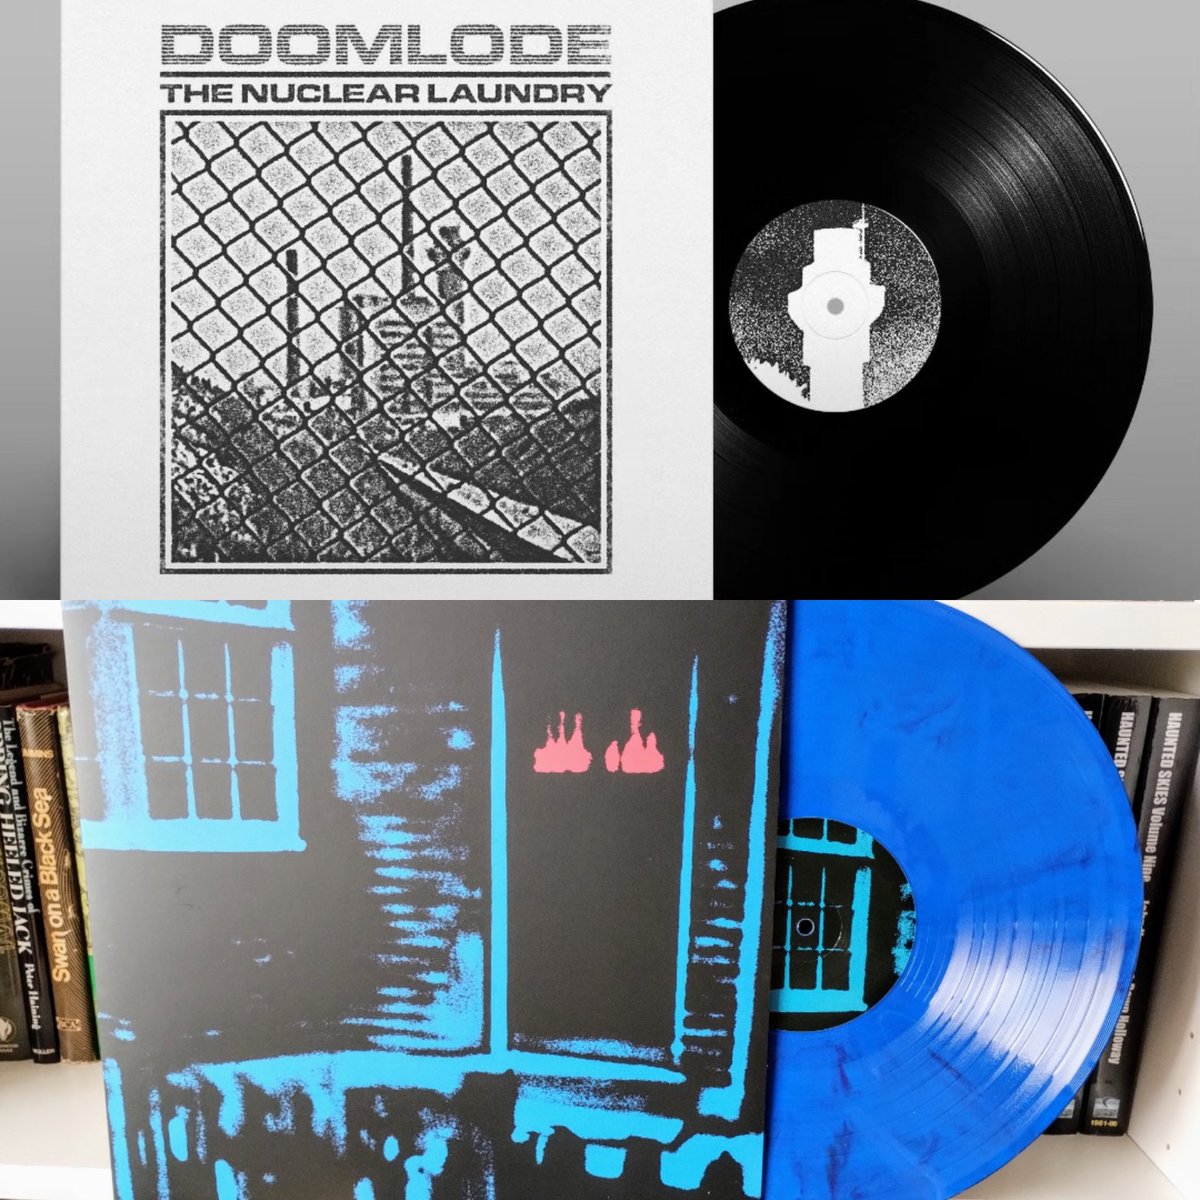 New vinyl editions! @DOOMLODE 'The Nuclear Laundry'. 100 copies on black vinyl + 8 page zine. Shipping this week. @TheNightMonitor 'This House Is Haunted'. 200 copies on blue marbled vinyl. Pre-order now for release on 5th July. fonolith.bandcamp.com/merch